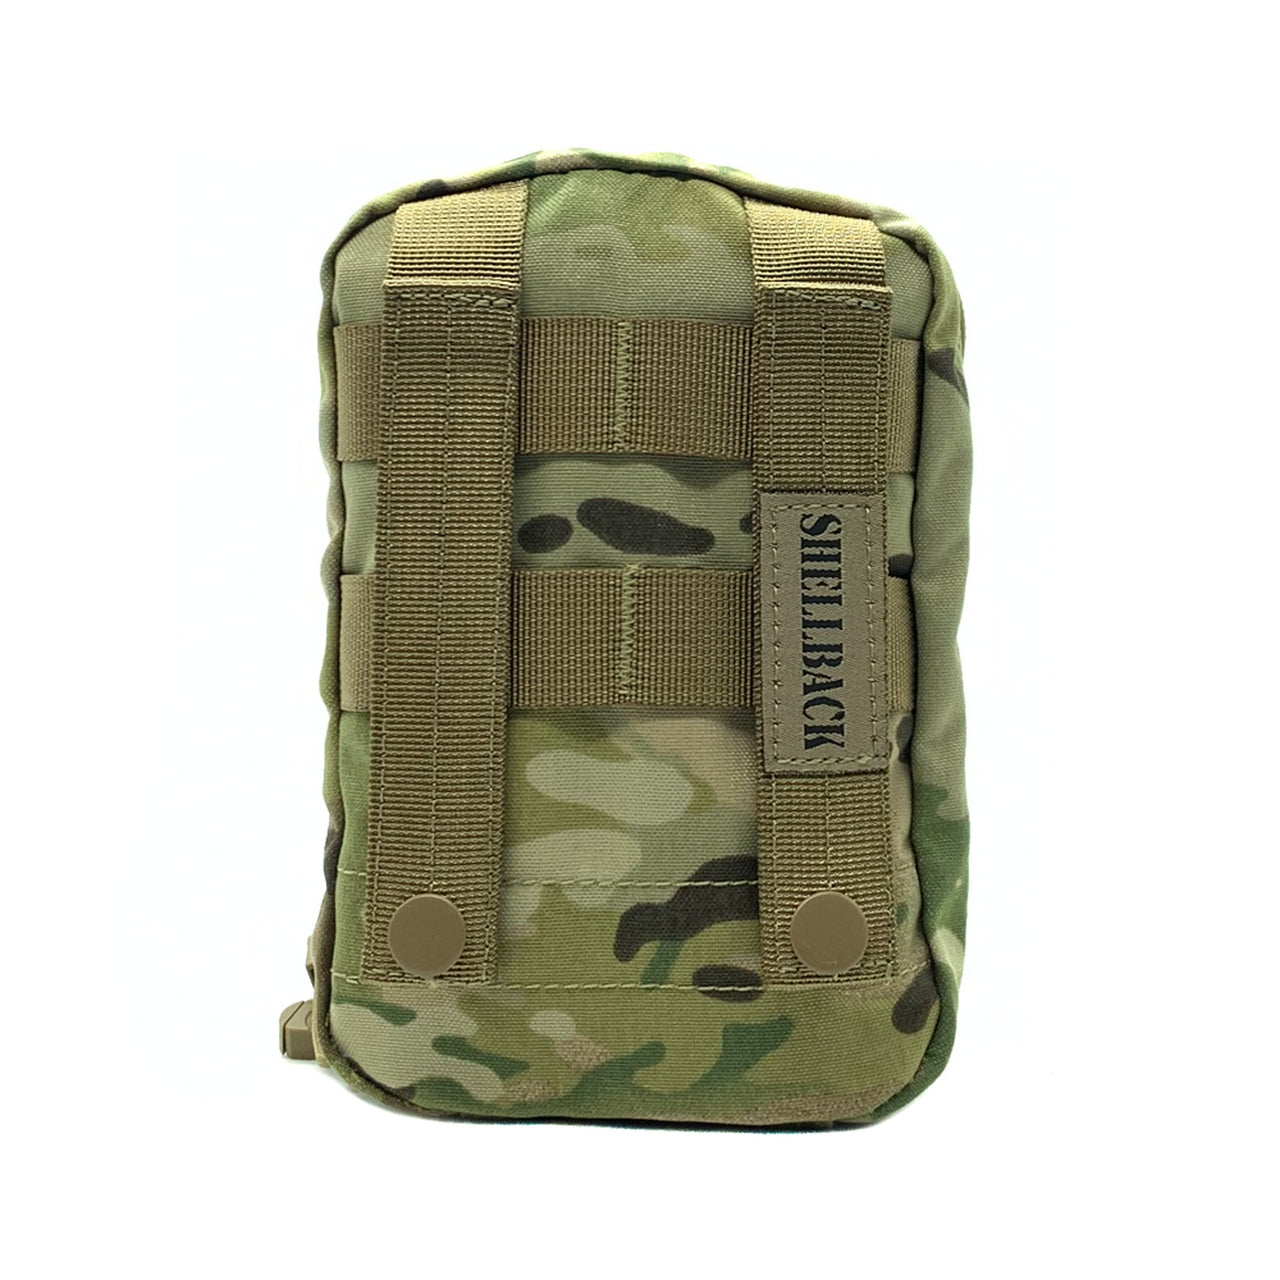 A Shellback Tactical Rip Away Medic Pouch on a white background.